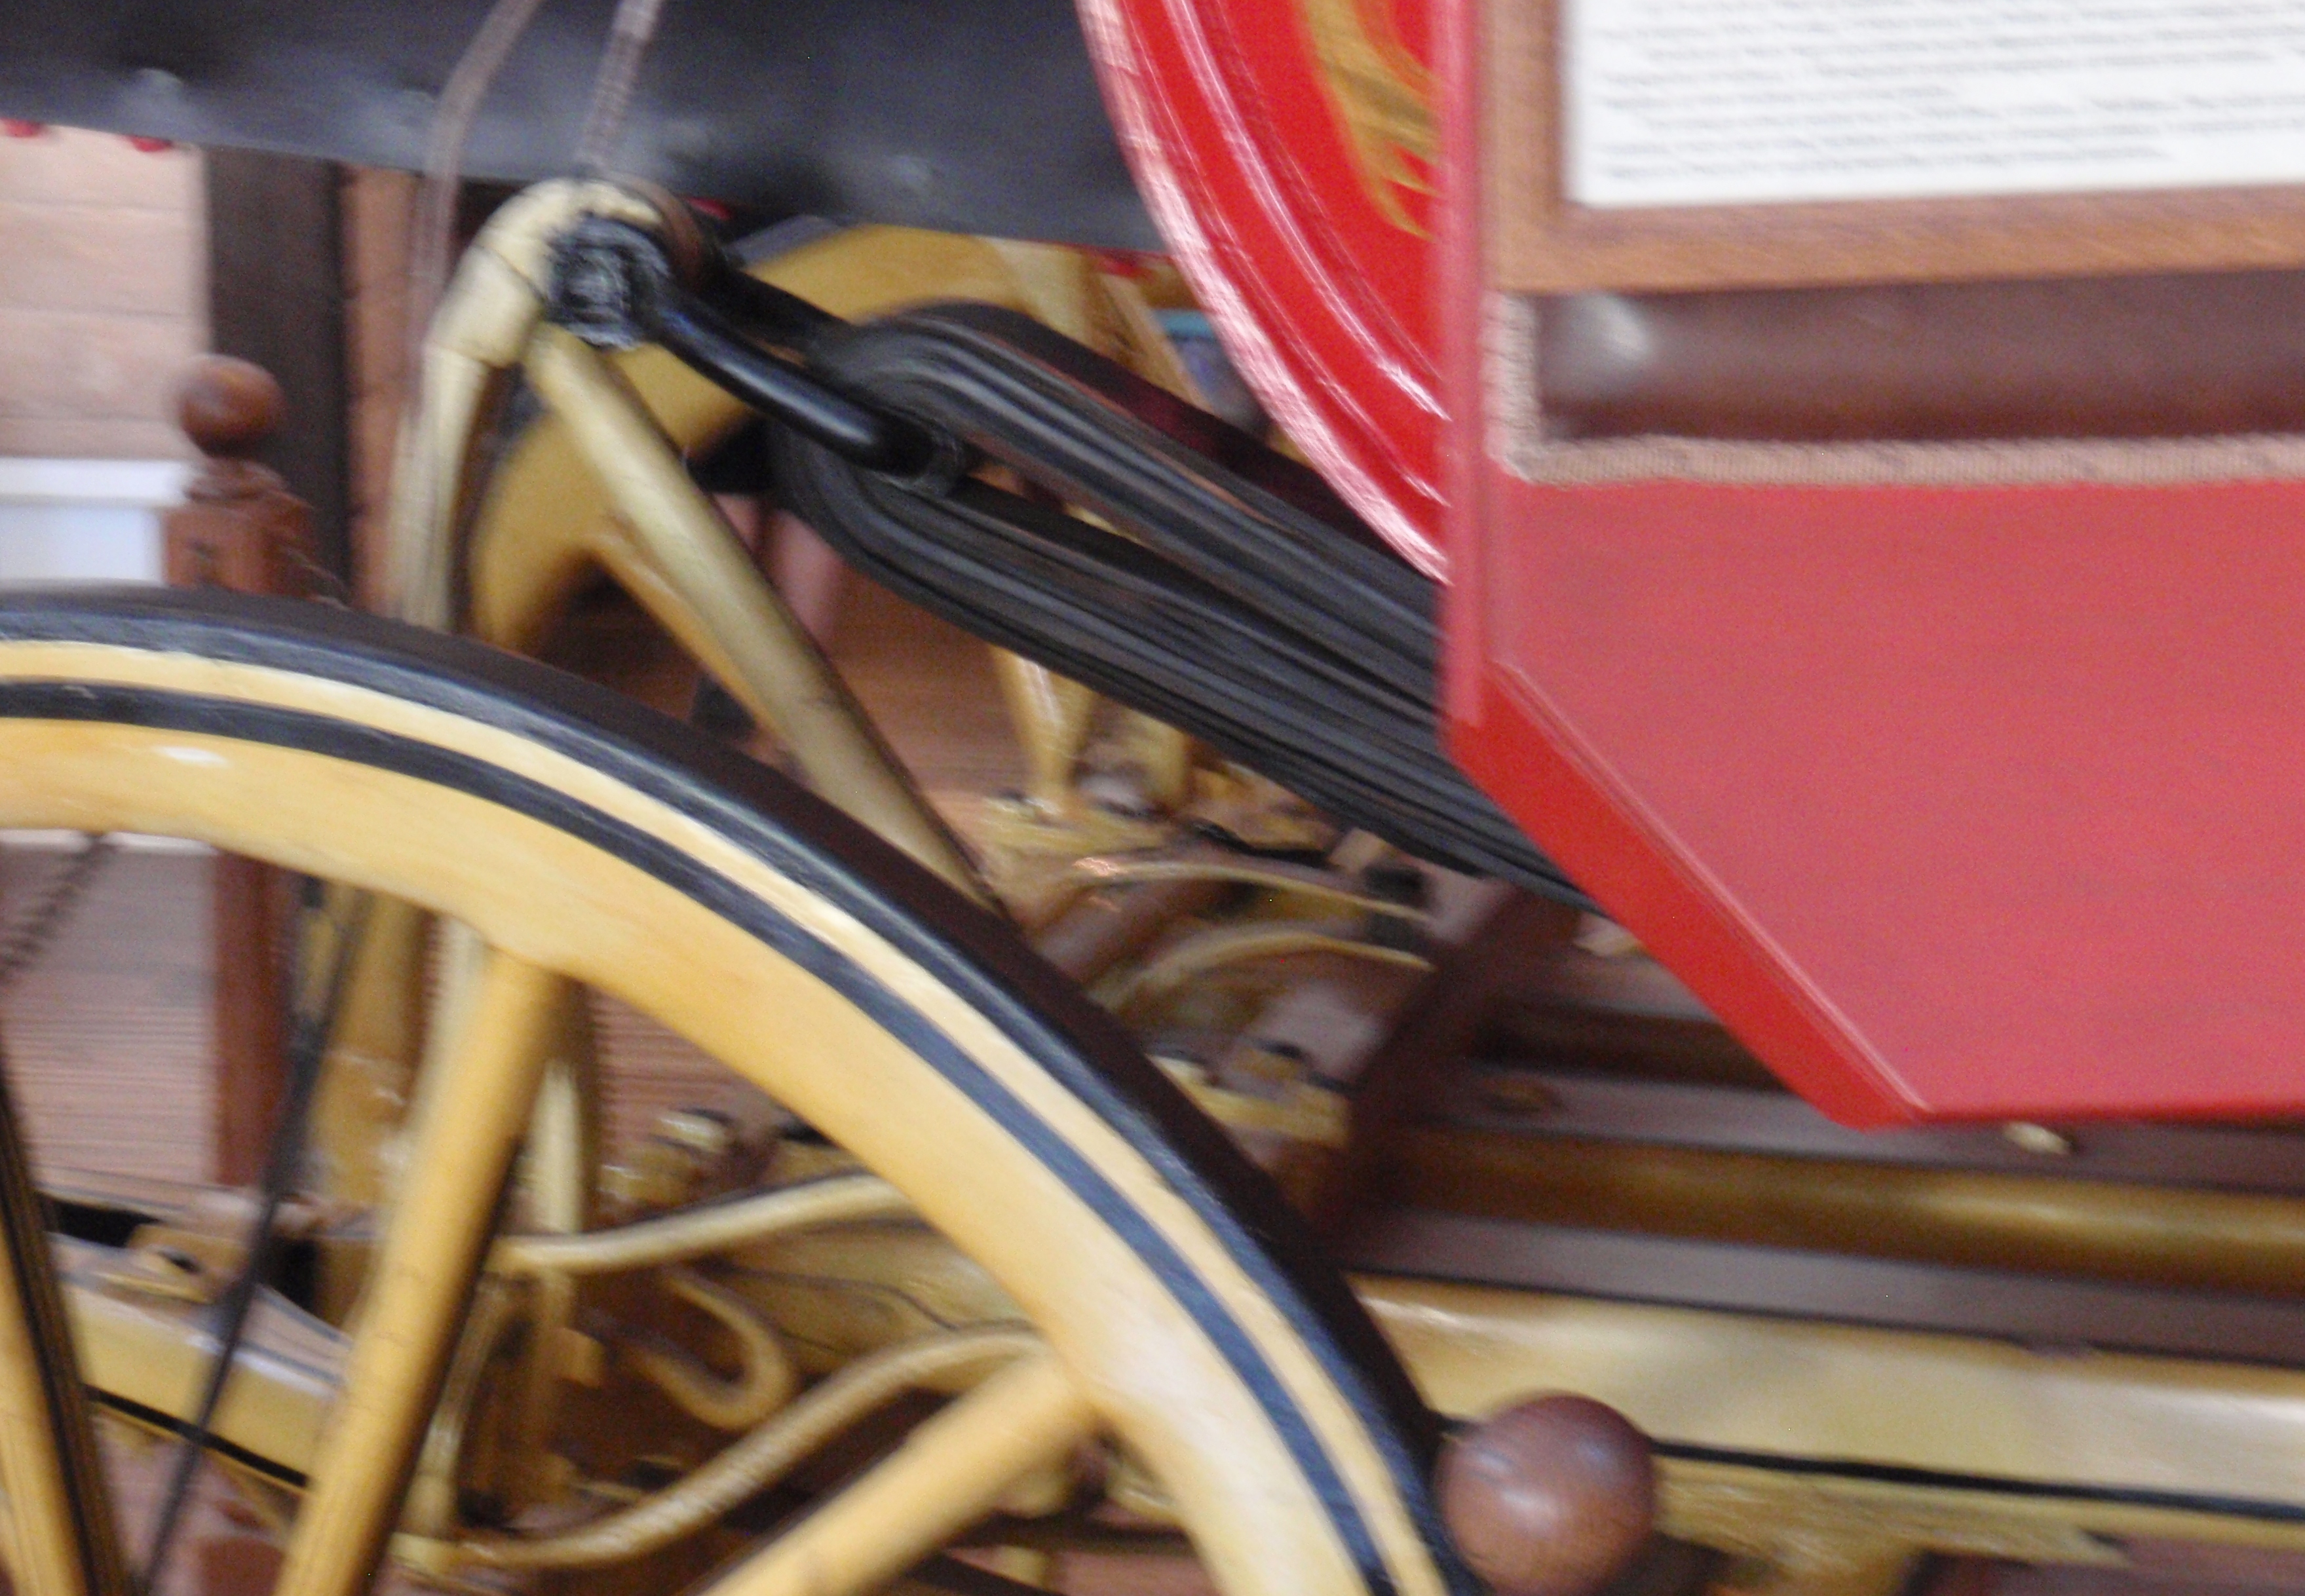 Out of focus view of suspension on a Concord coach. October 2016 photo at Wells Fargo's museum in San Diego by James Ulvog.